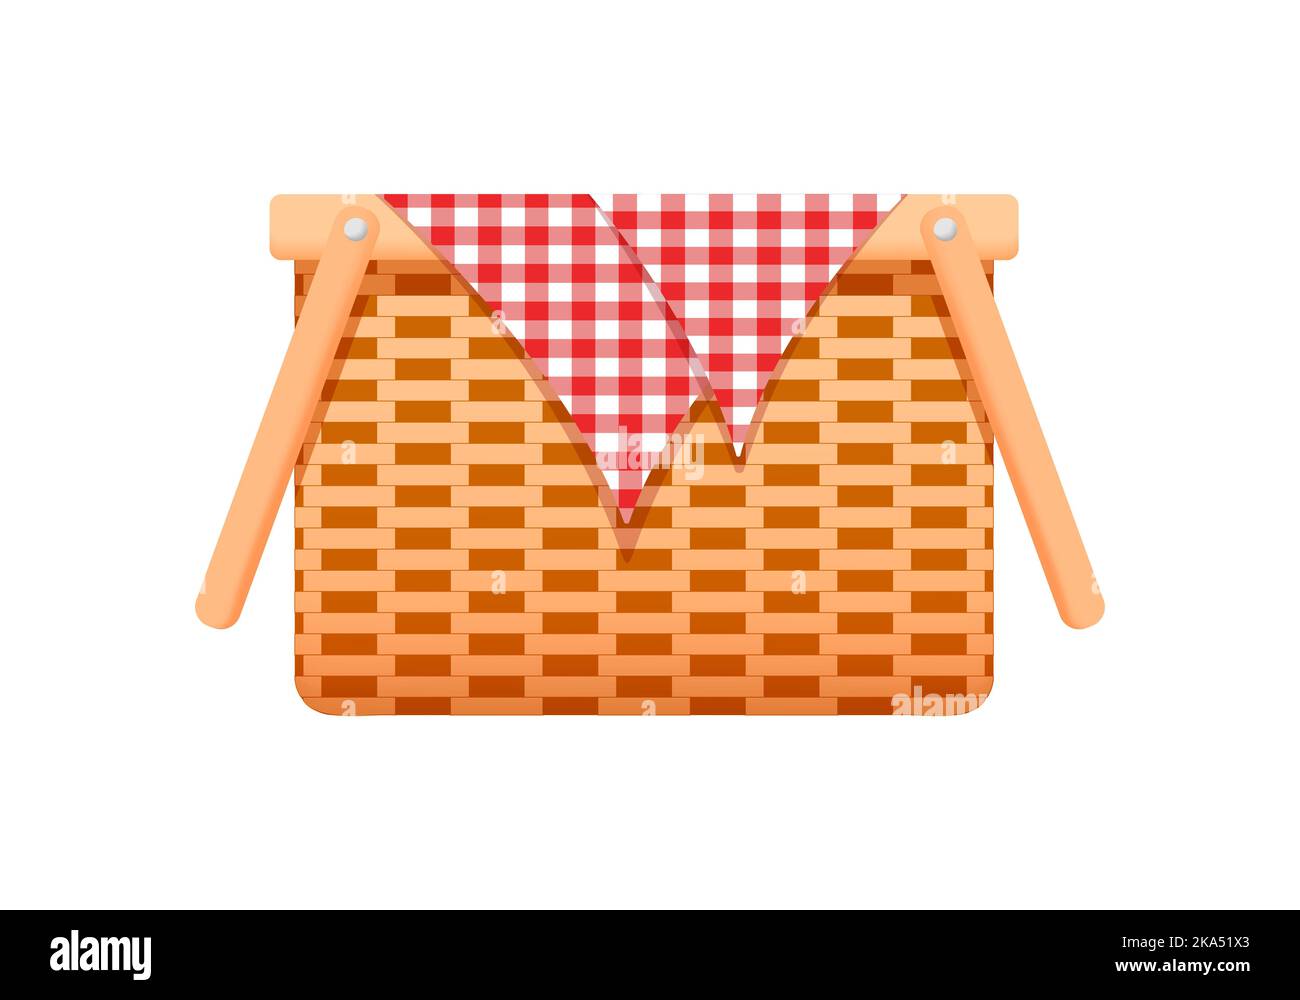 Empty woven basket with gingham picnic blanket. Hand wicker willow or bamboo hamper with handles isolated on white background. Vector cartoon illustration. Stock Vector